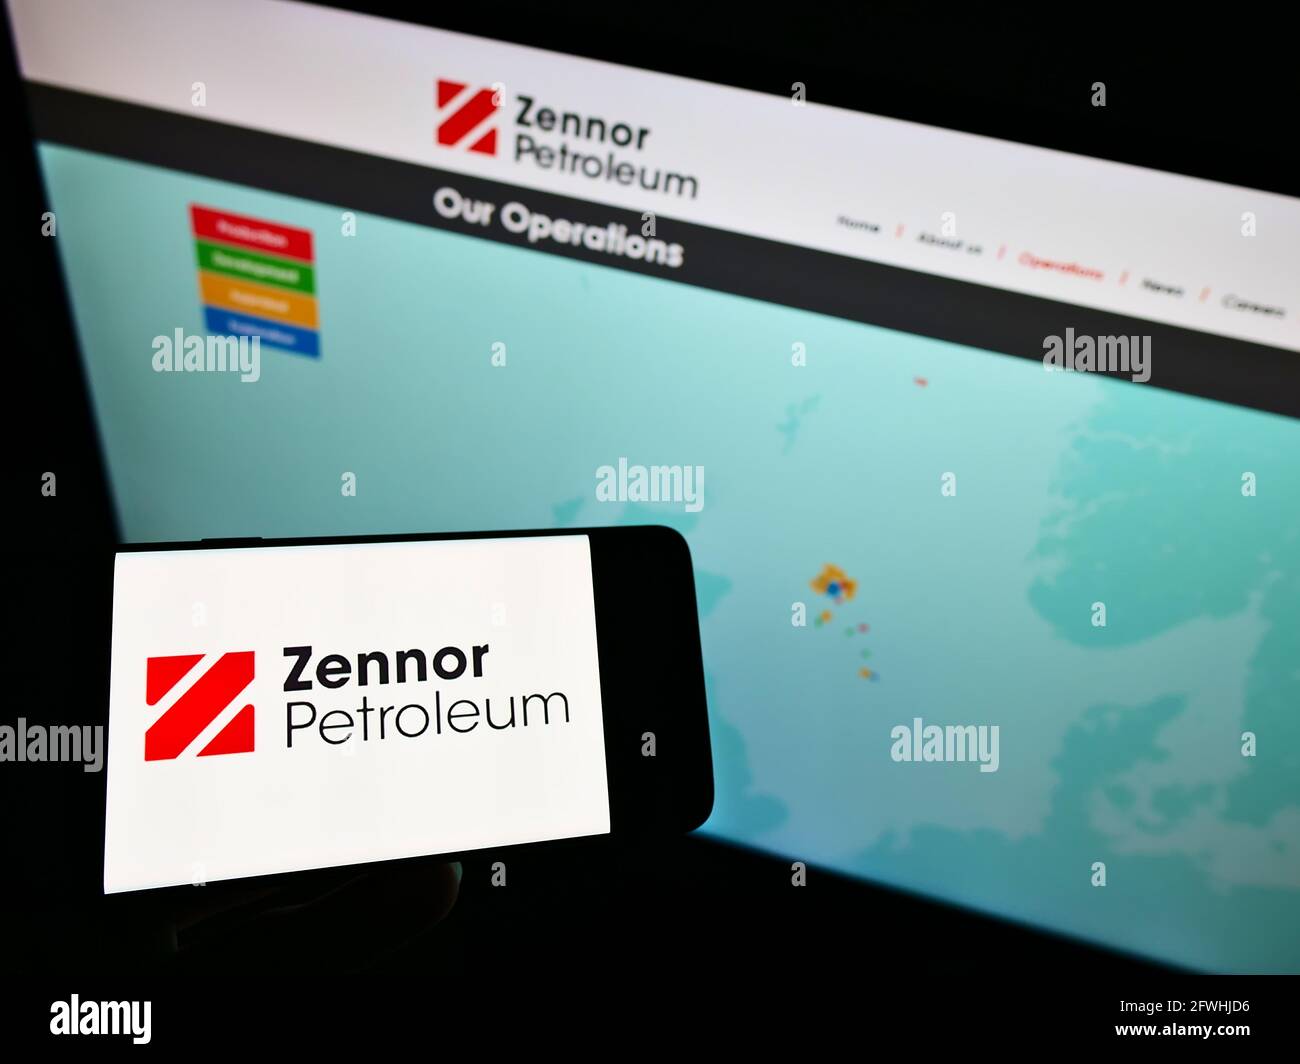 Person holding smartphone with logo of British oil and gas company Zennor Petroleum Ltd. on screen in front of website. Focus on phone display. Stock Photo